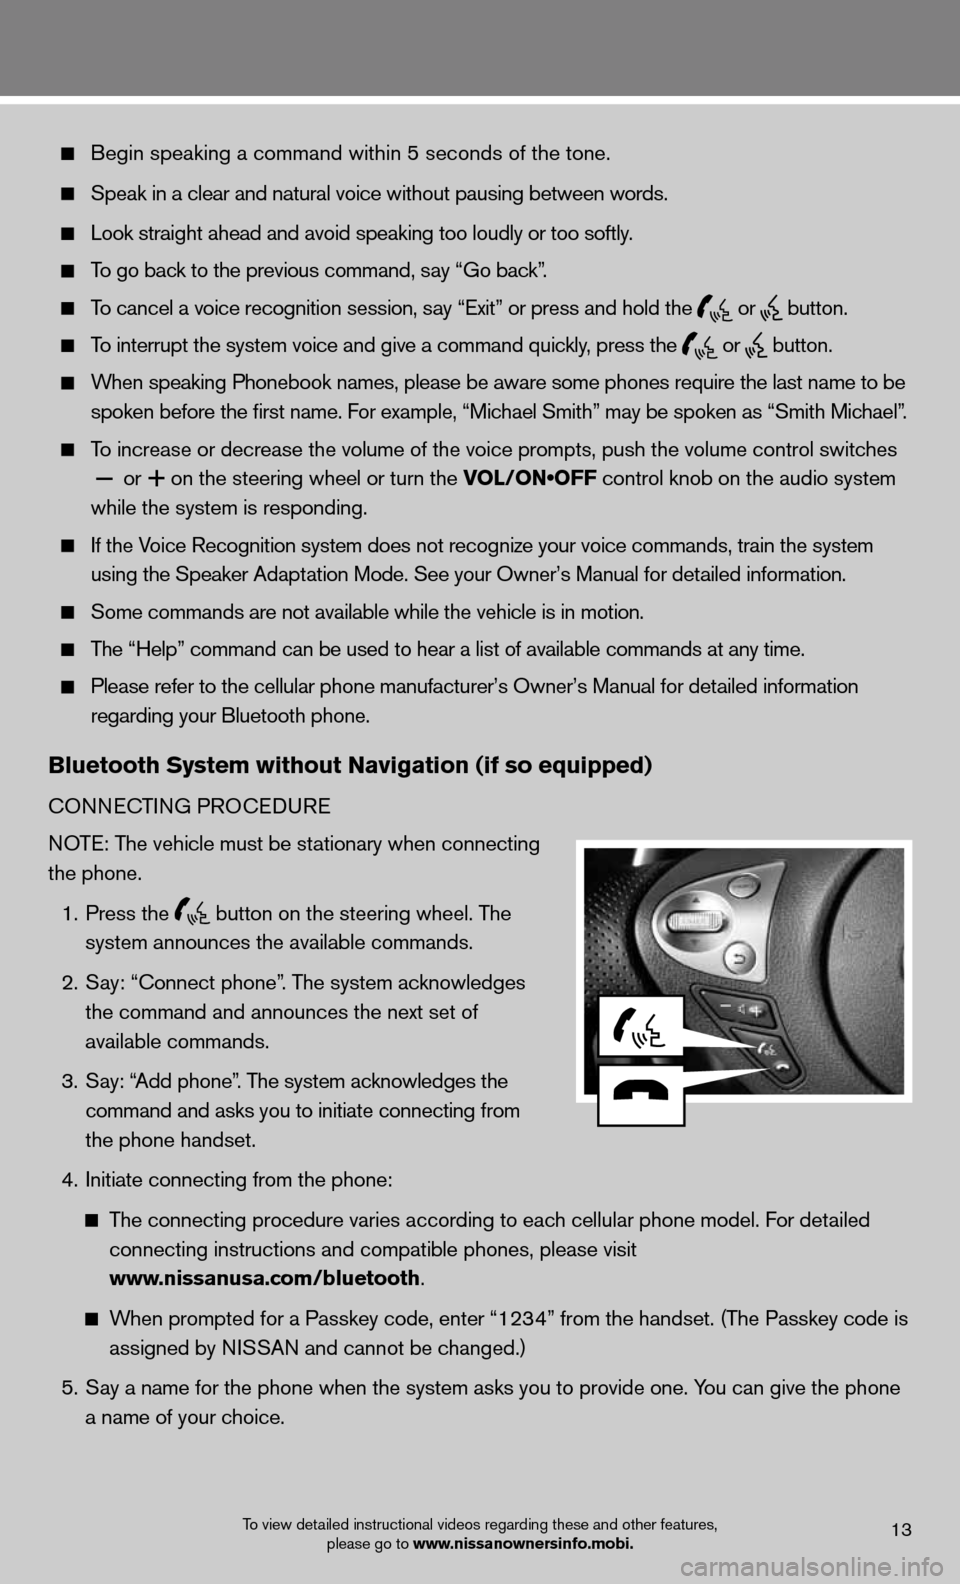 NISSAN MAXIMA 2012 A35 / 7.G Quick Reference Guide    Begin speaking a command within 5 seconds of the tone.
 
  Speak in a clear and natural voice without pausing between words.  
 
  Look straight ahead and avoid speaking too loudly or too softly.
 